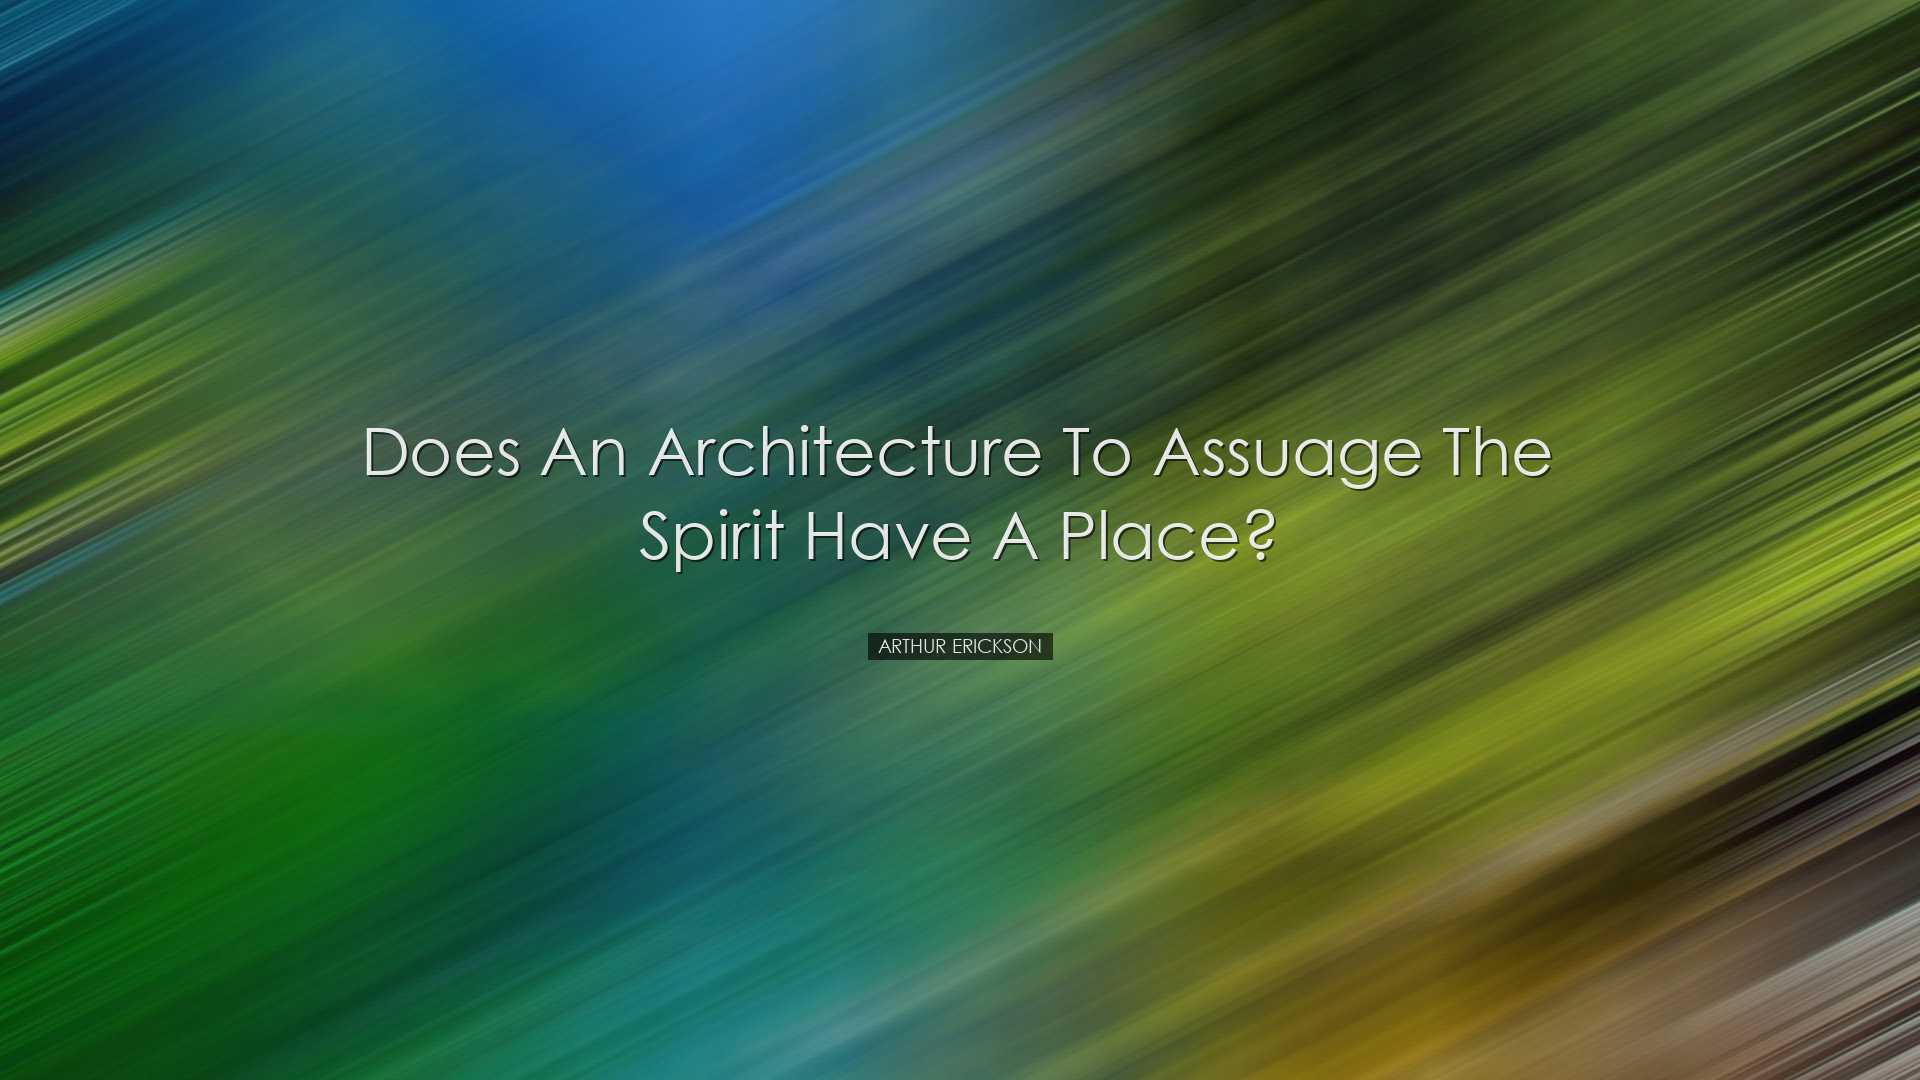 Does an architecture to assuage the spirit have a place? - Arthur